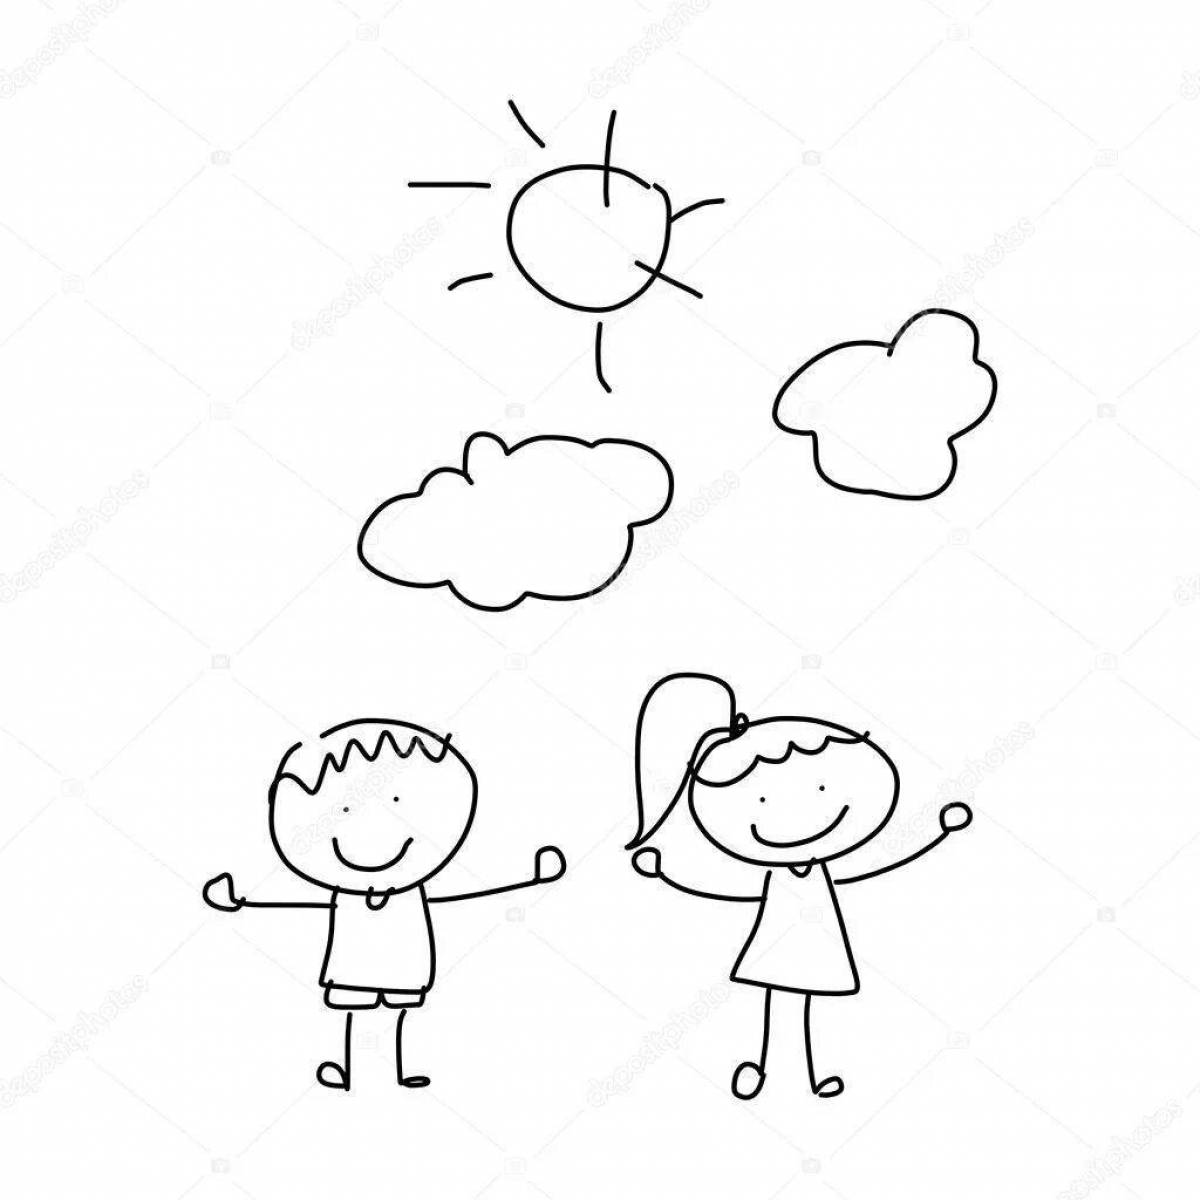 Coloring page glowing boy and girl holding hands